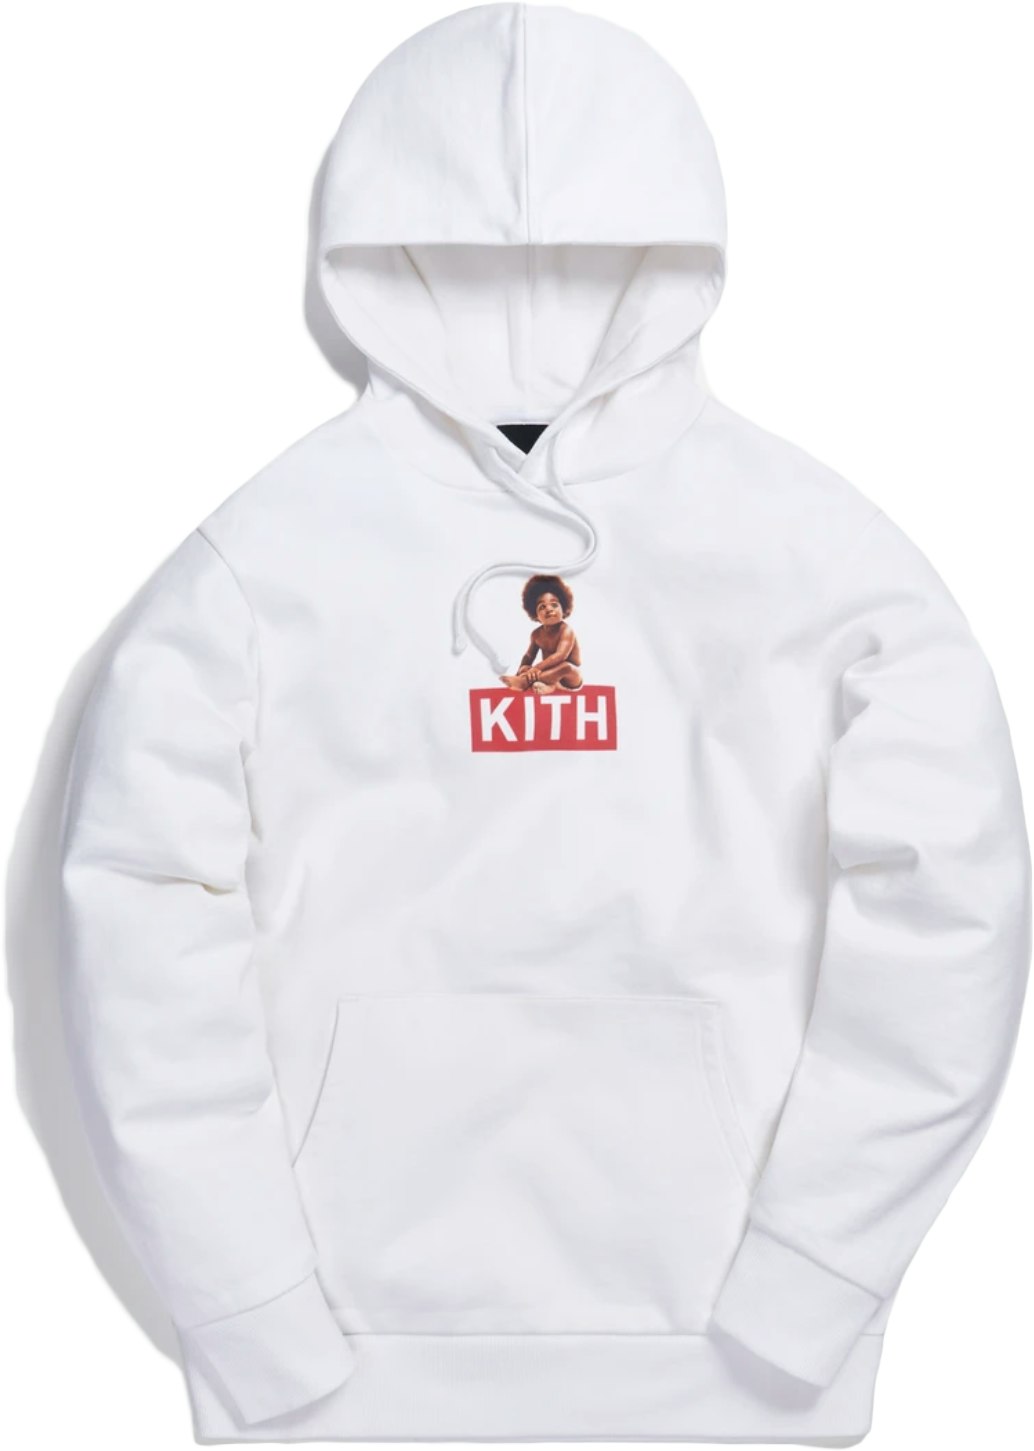 KITH INVISIBLE FRIENDS キス パーカー S 受注販売品